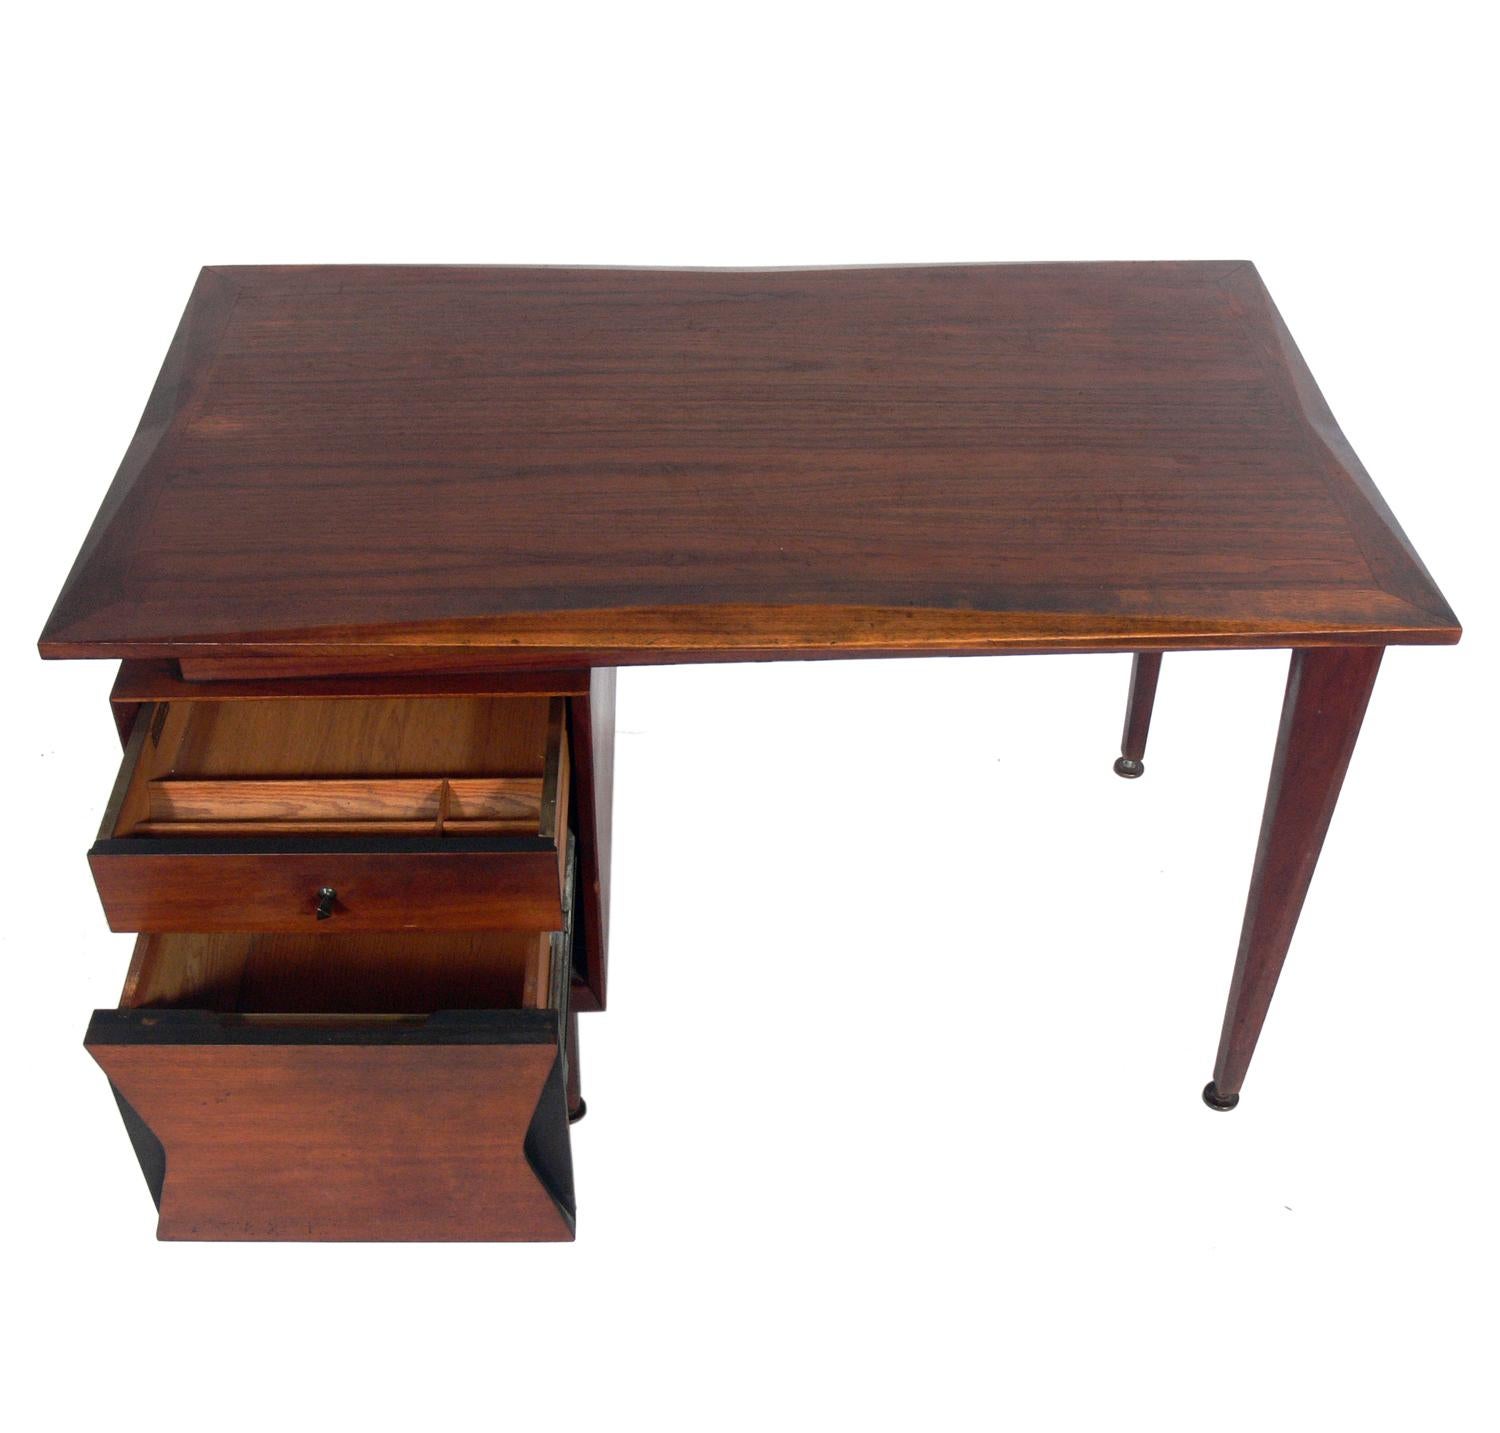 Mid-Century Modern Midcentury Walnut Desk and Chair by Marc Berge for Grosfeld House